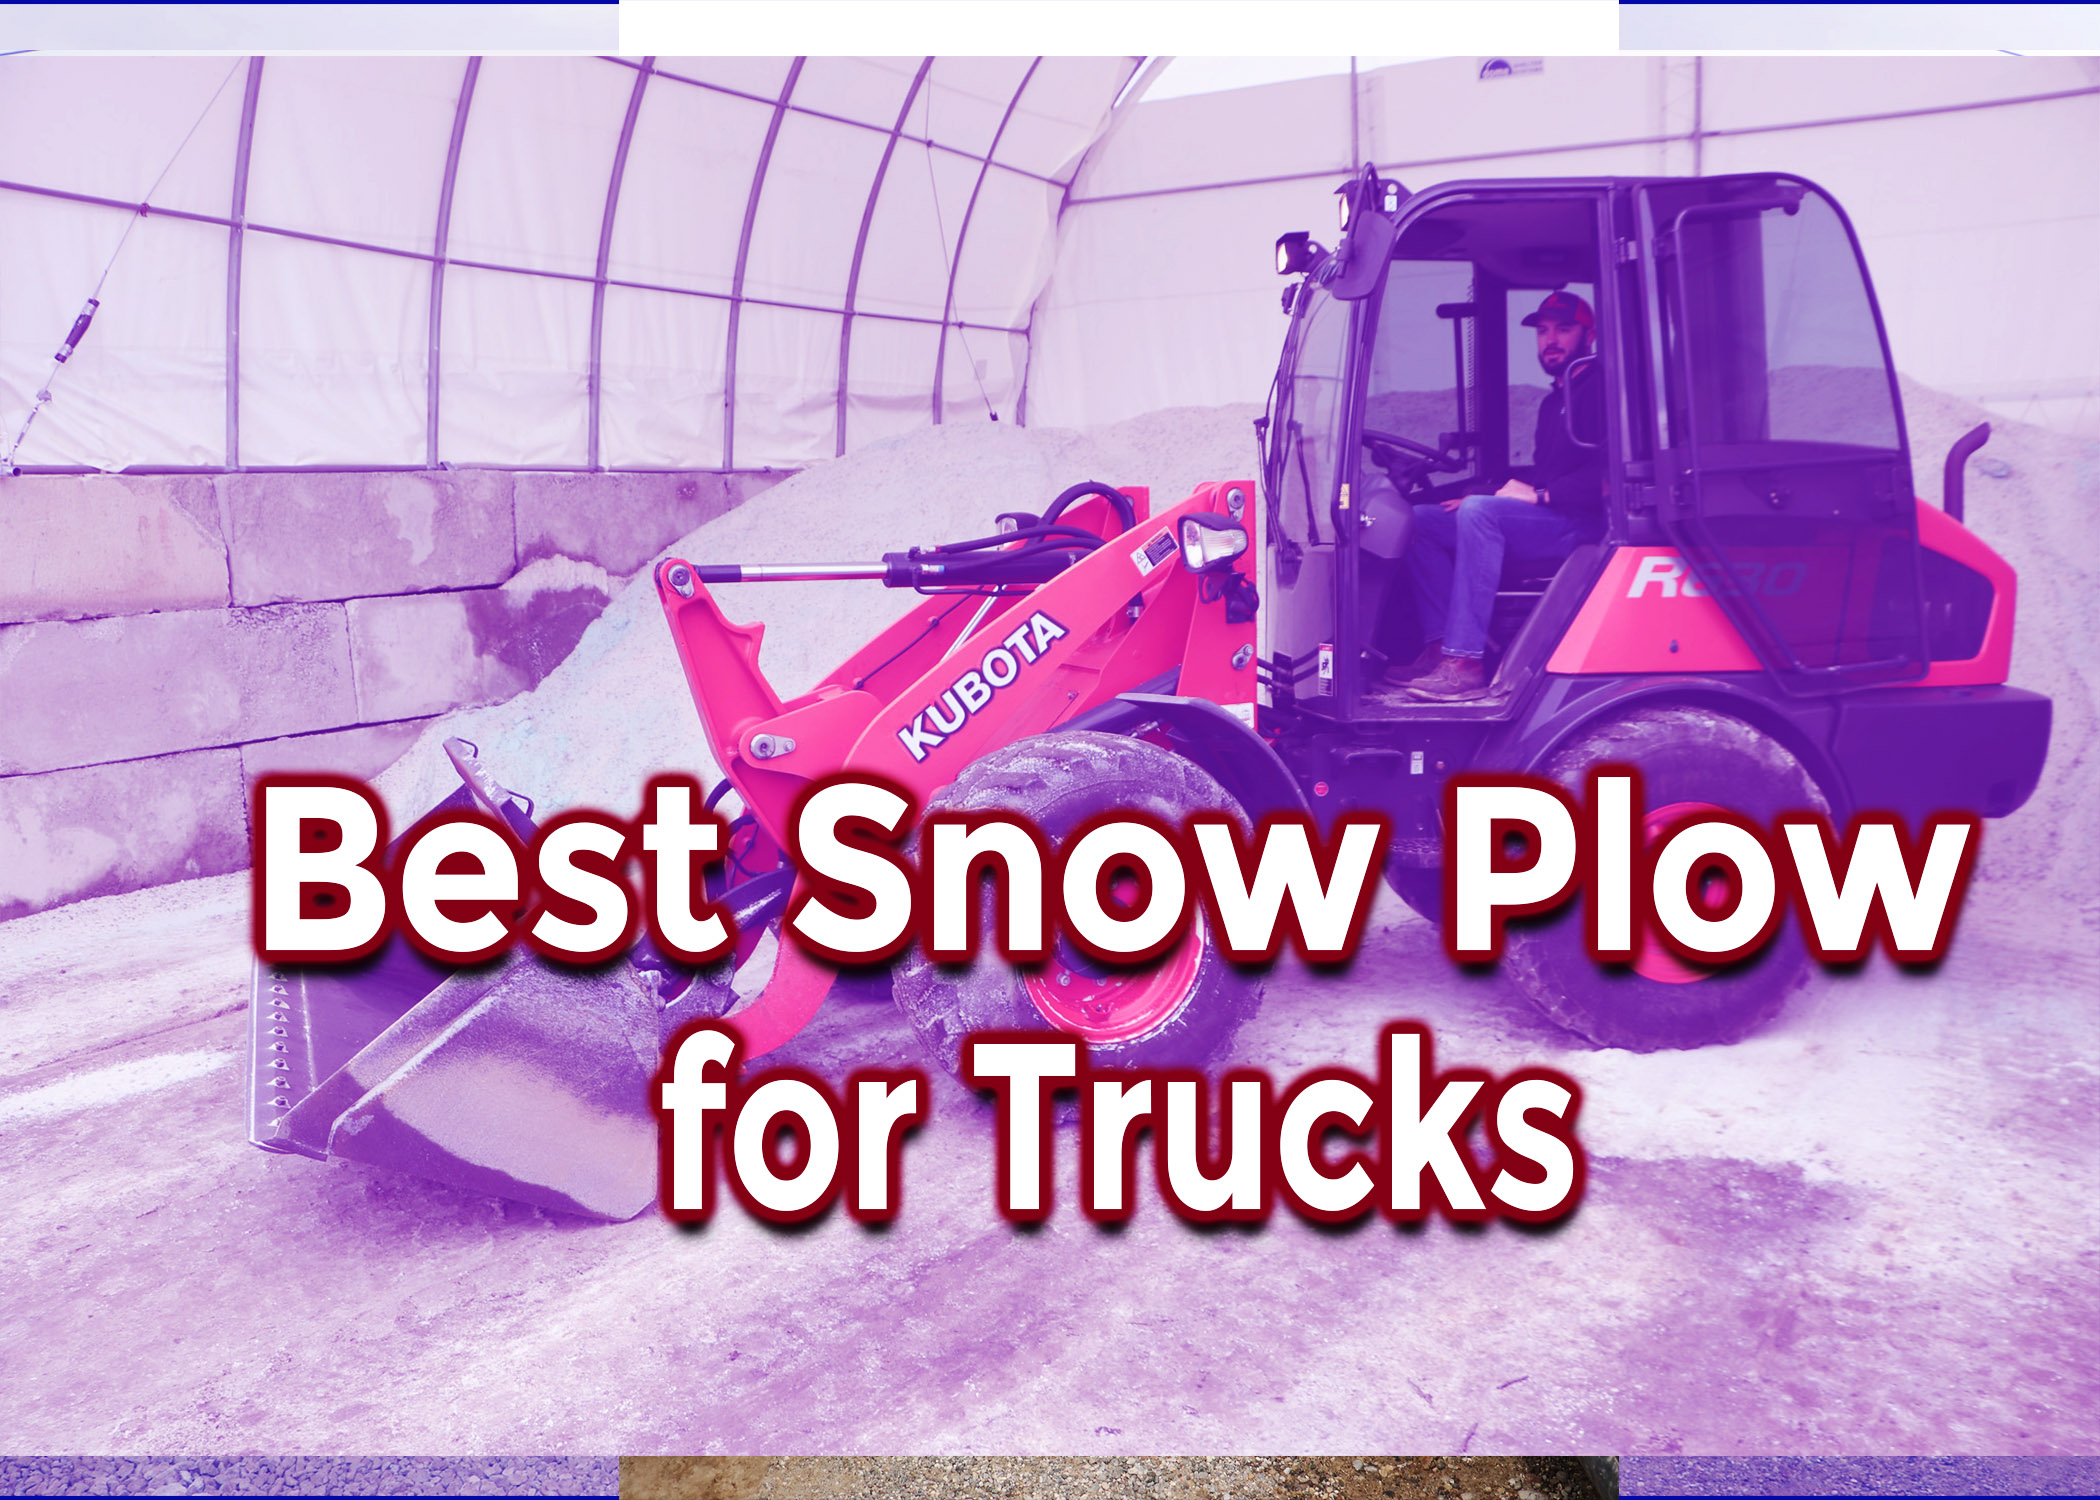 Selecting The Best Snow Plow for Trucks